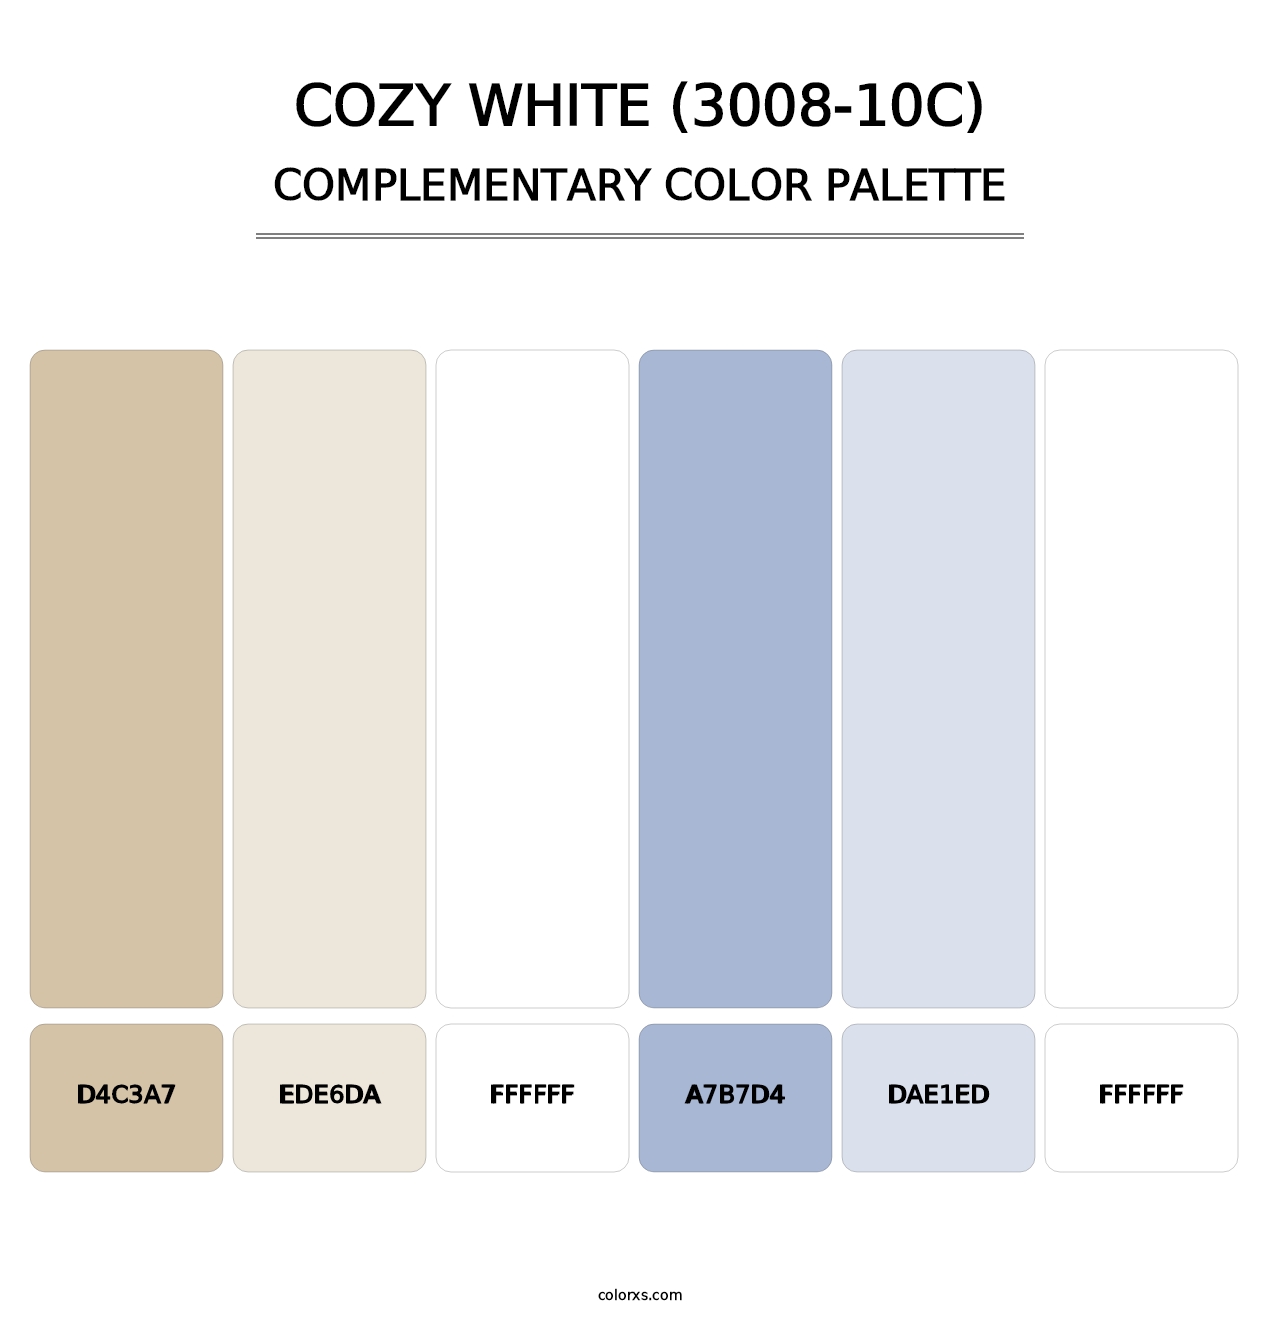 Cozy White (3008-10C) - Complementary Color Palette